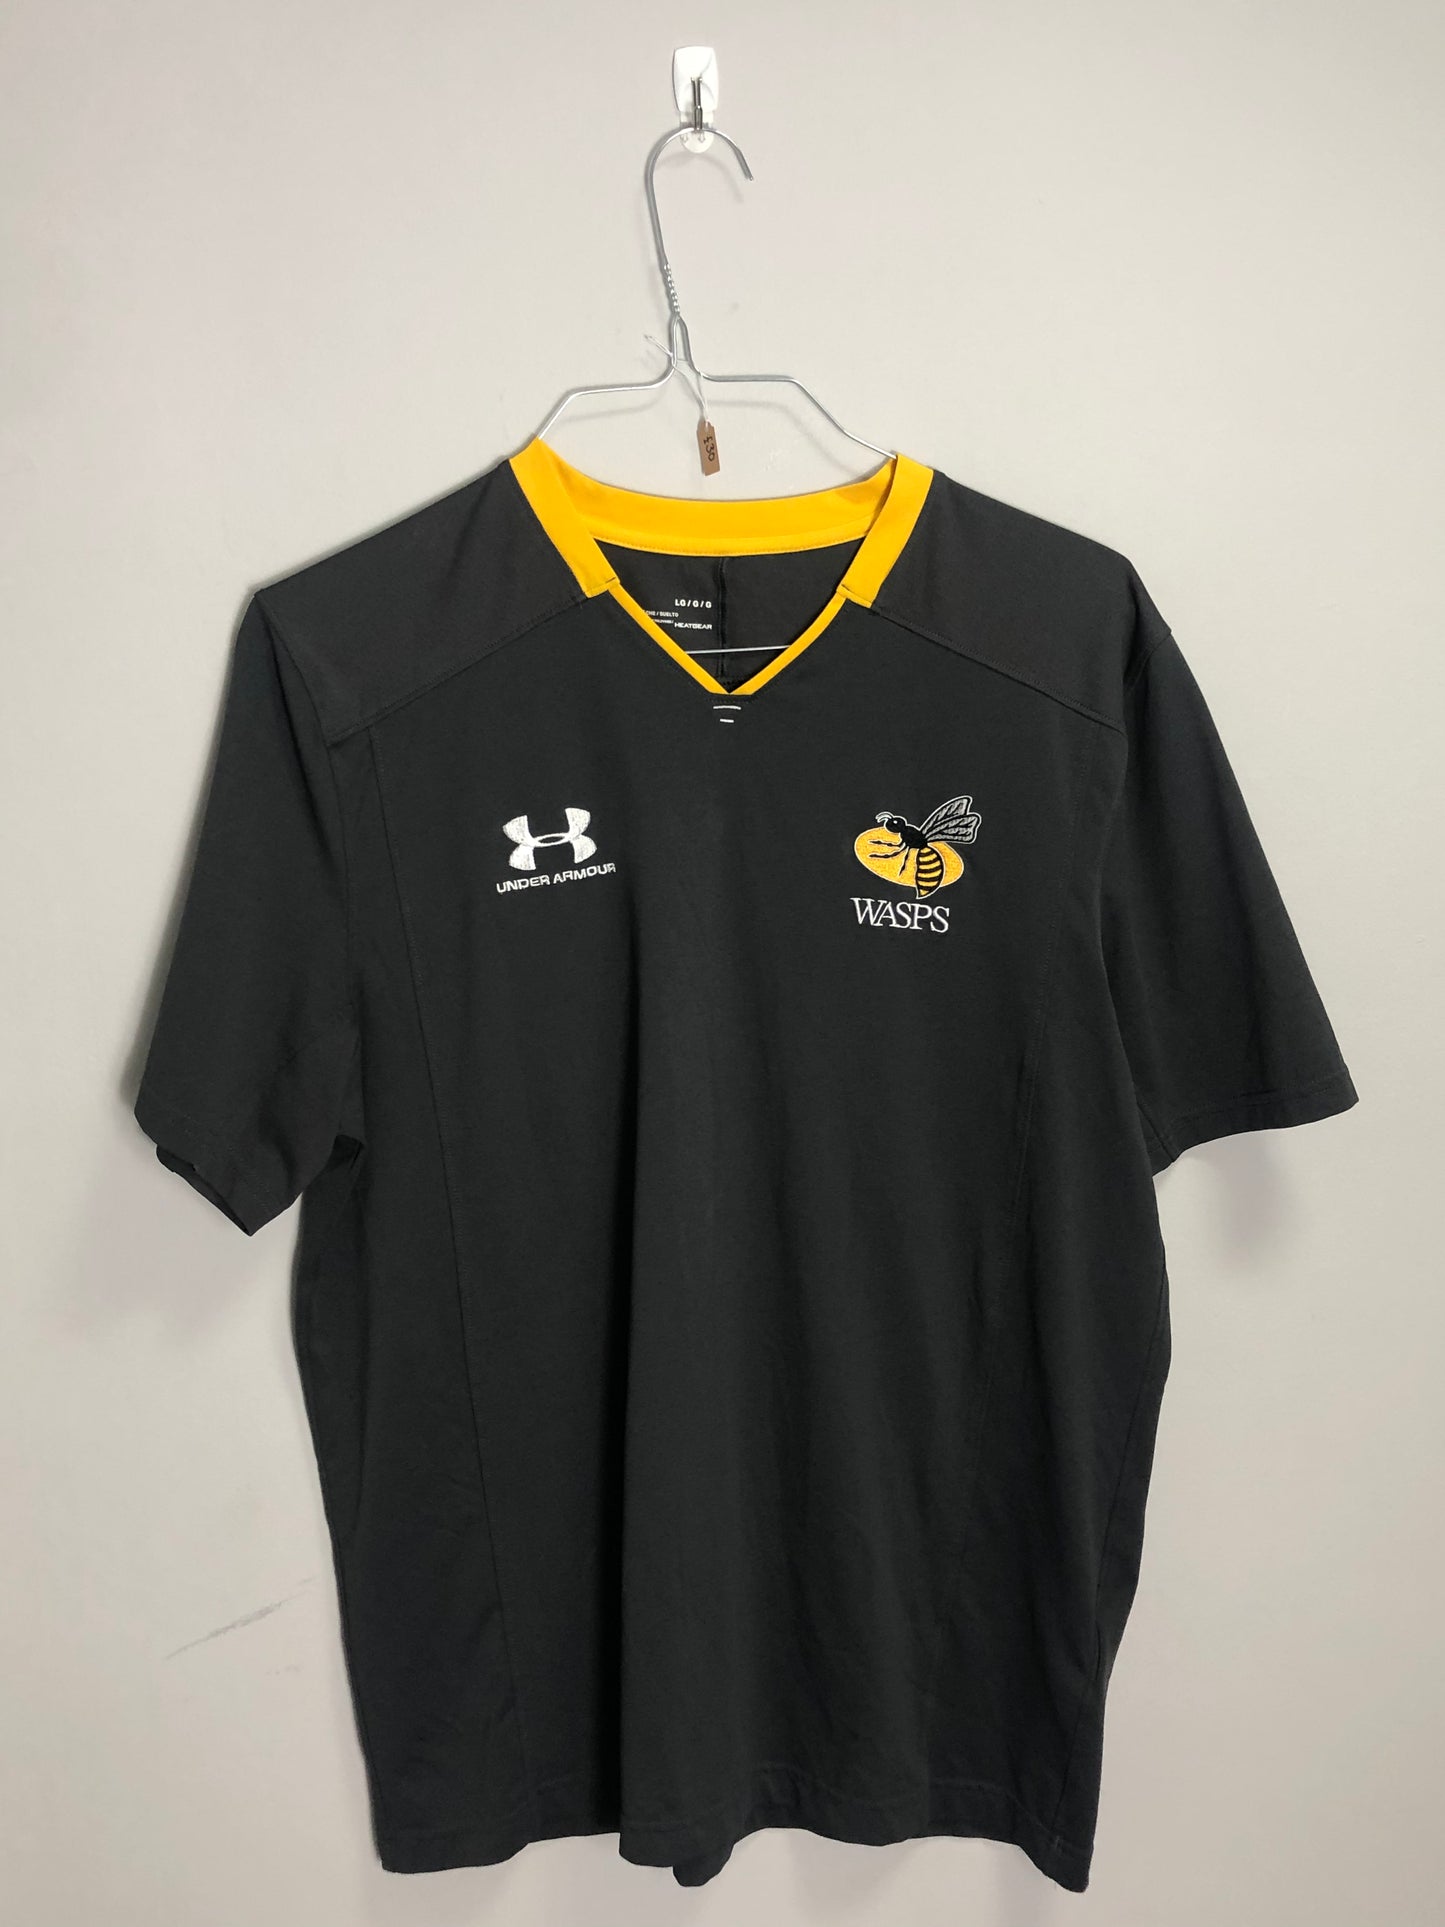 Wasps Rugby Training Shirt - Large - 40” Chest